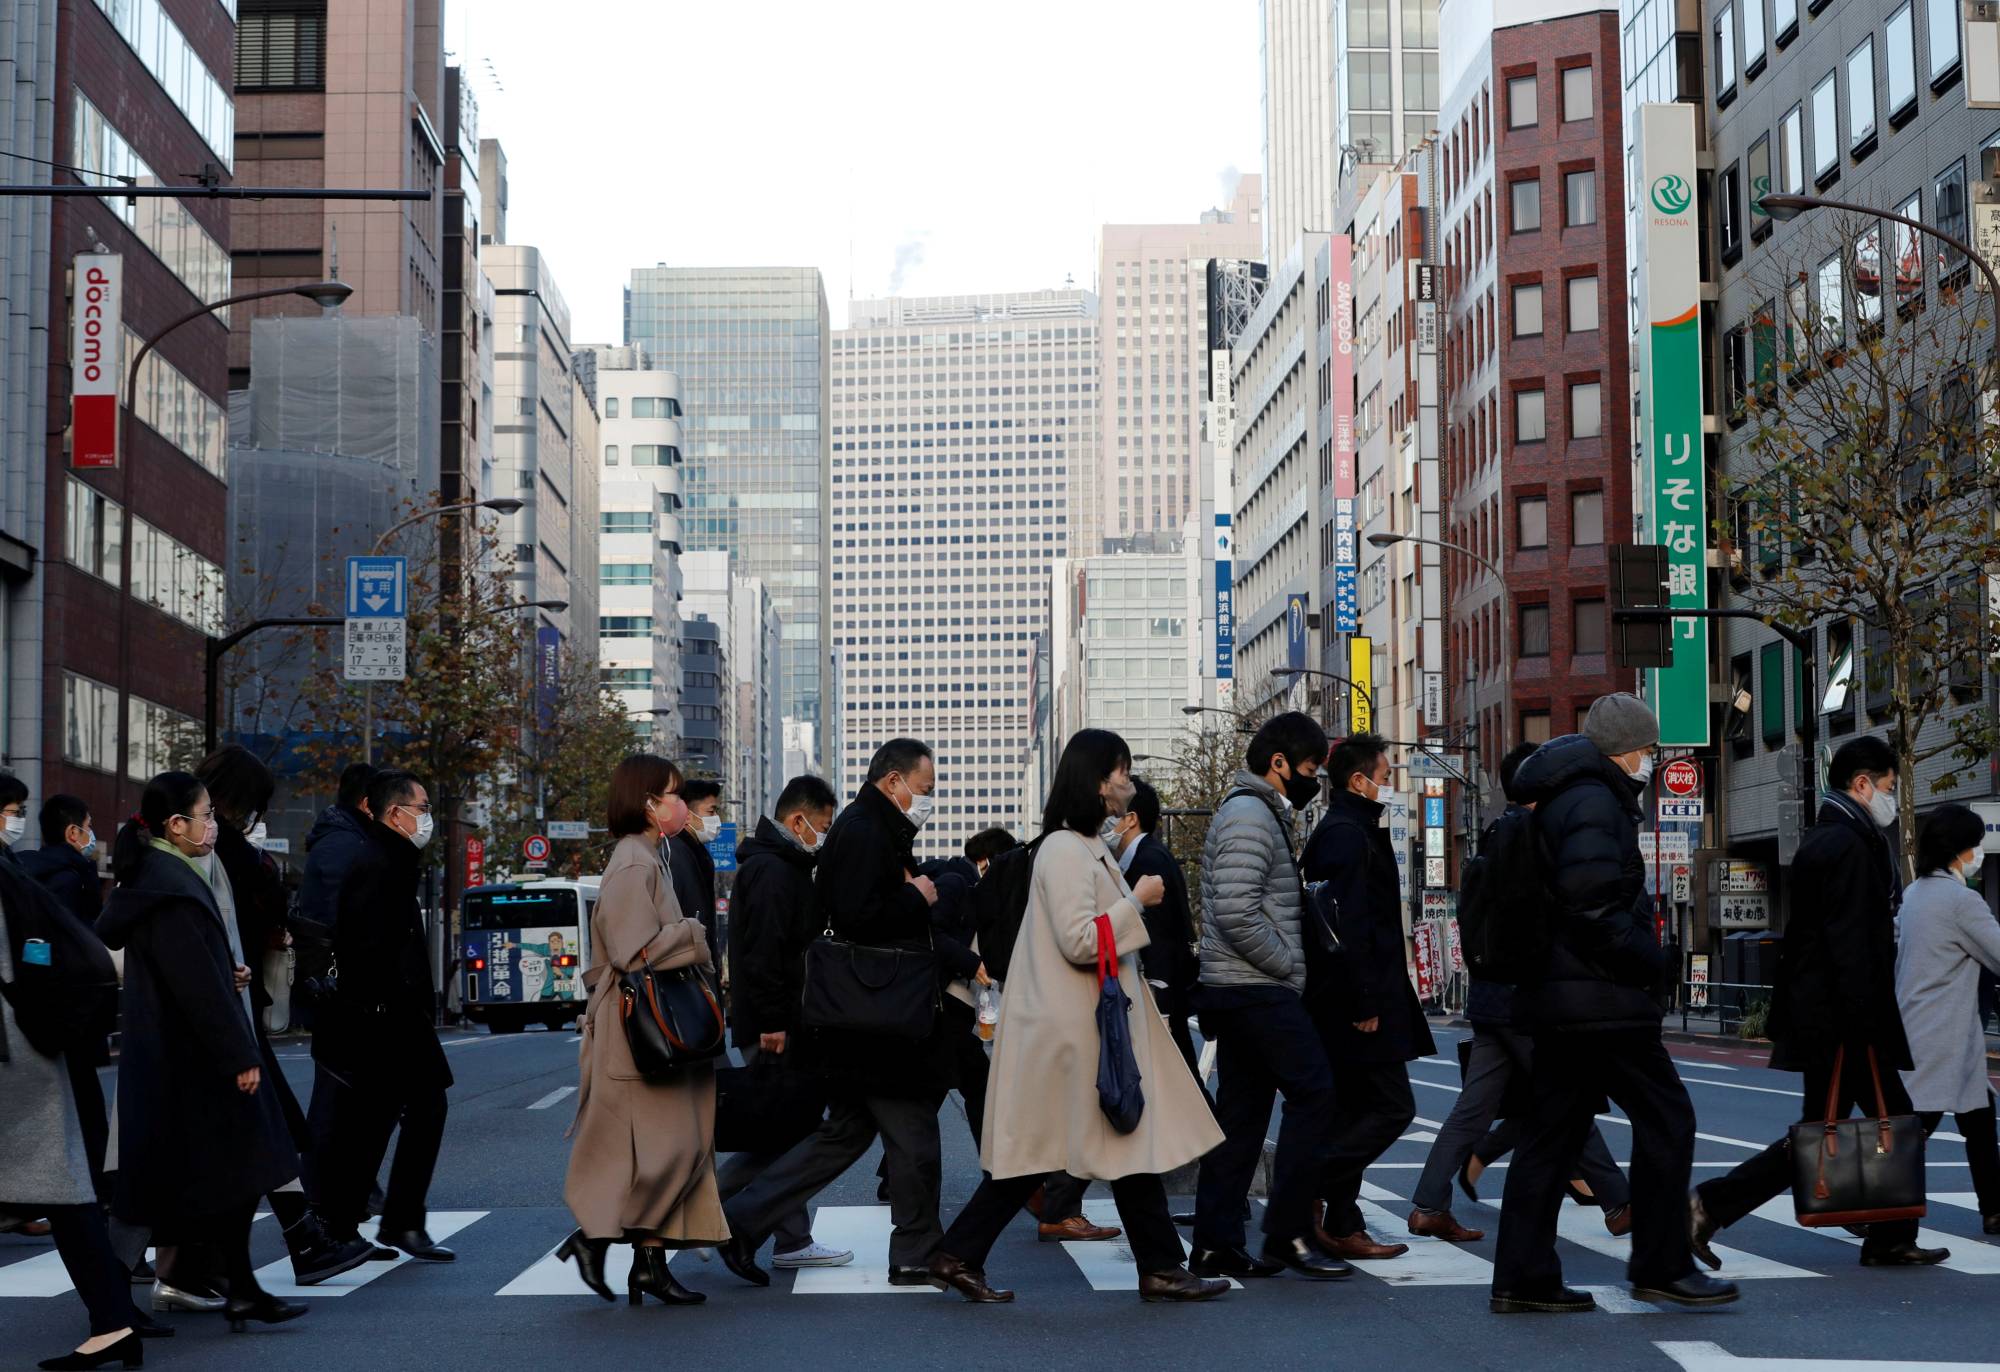 According to statistics compiled by Dai-ichi Life Research Institute, around 8.41 million employees in Japan expressed a desire to change jobs in 2021, compared to 8.19 million workers in 2020 and 8 million in 2019. | REUTERS